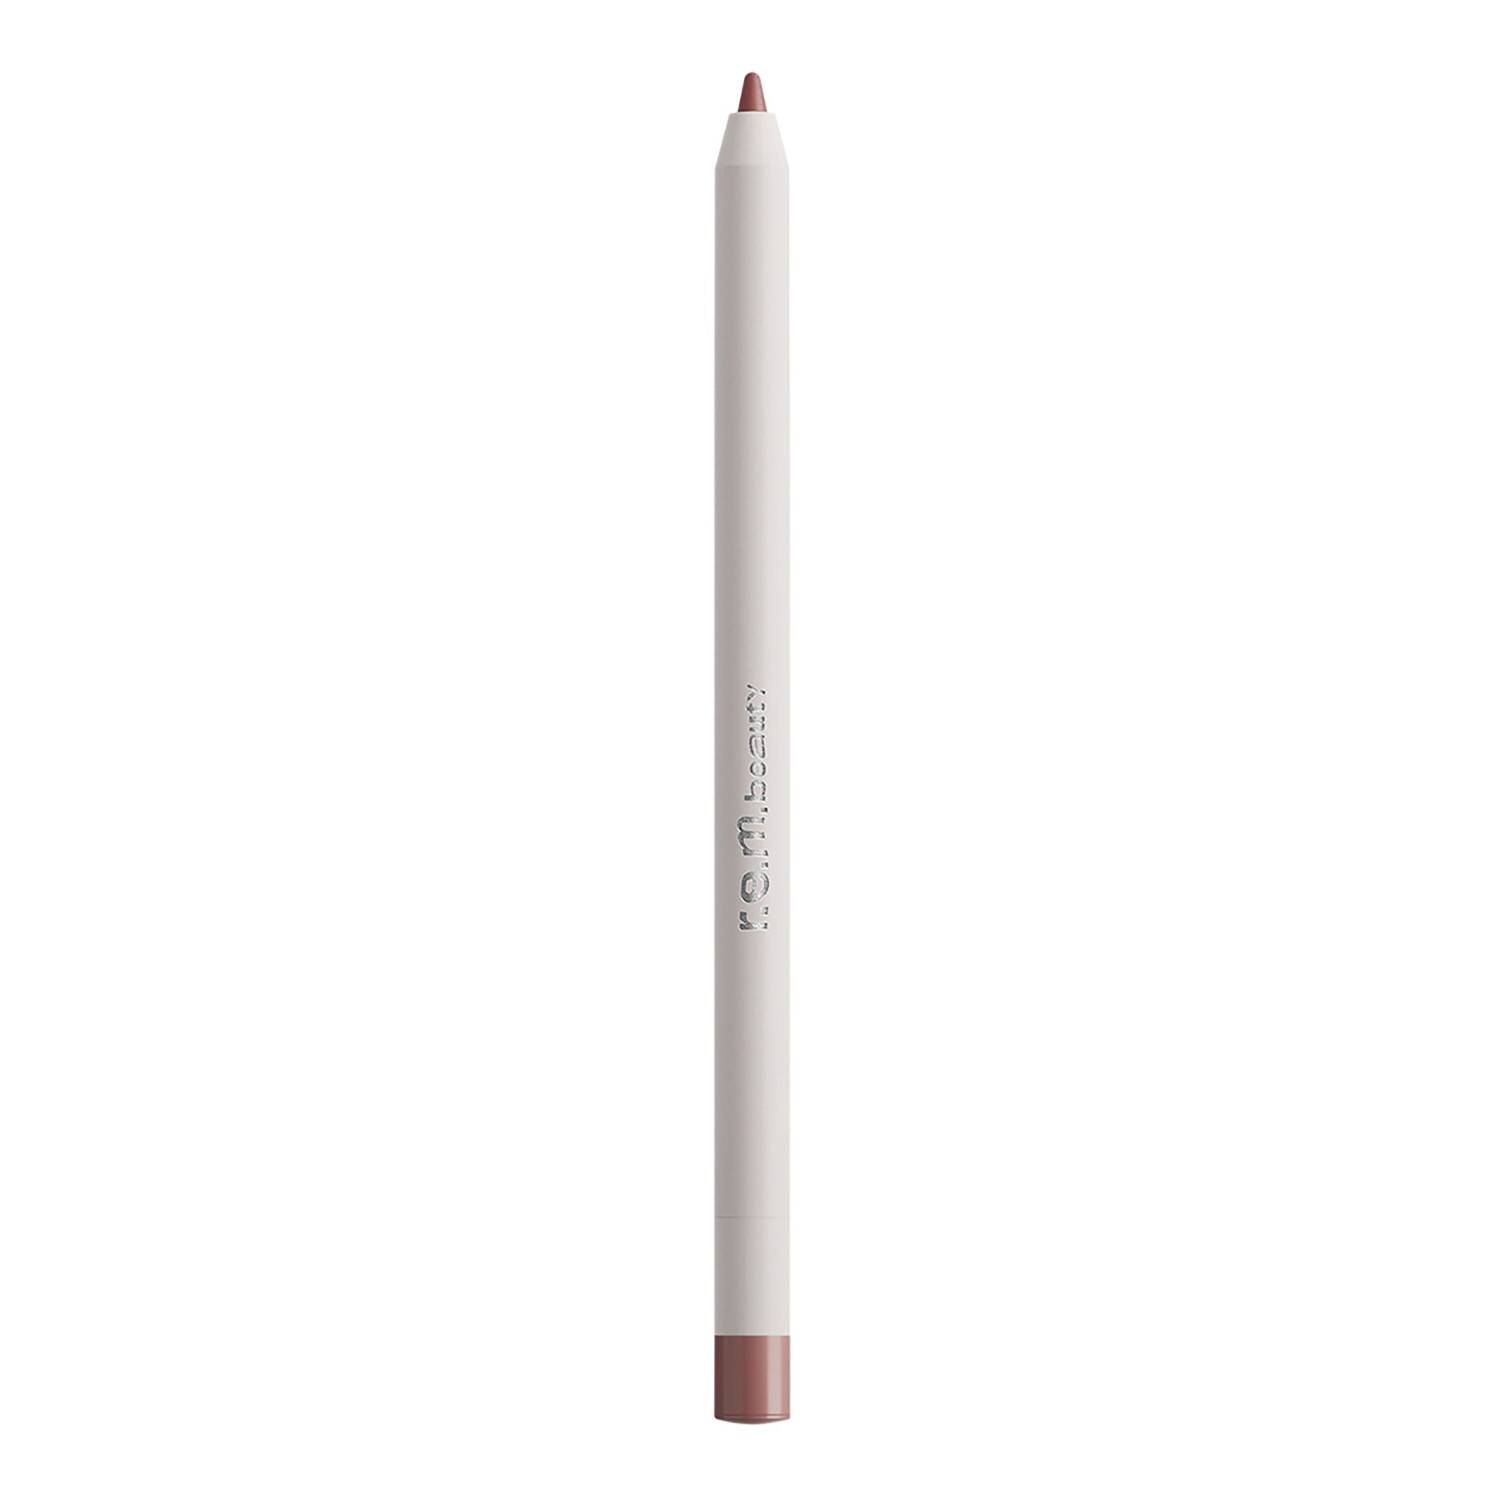 Rem Beauty At The Borderline Lip Liner Pencil 0.5G Eq Rosy Brown Nude